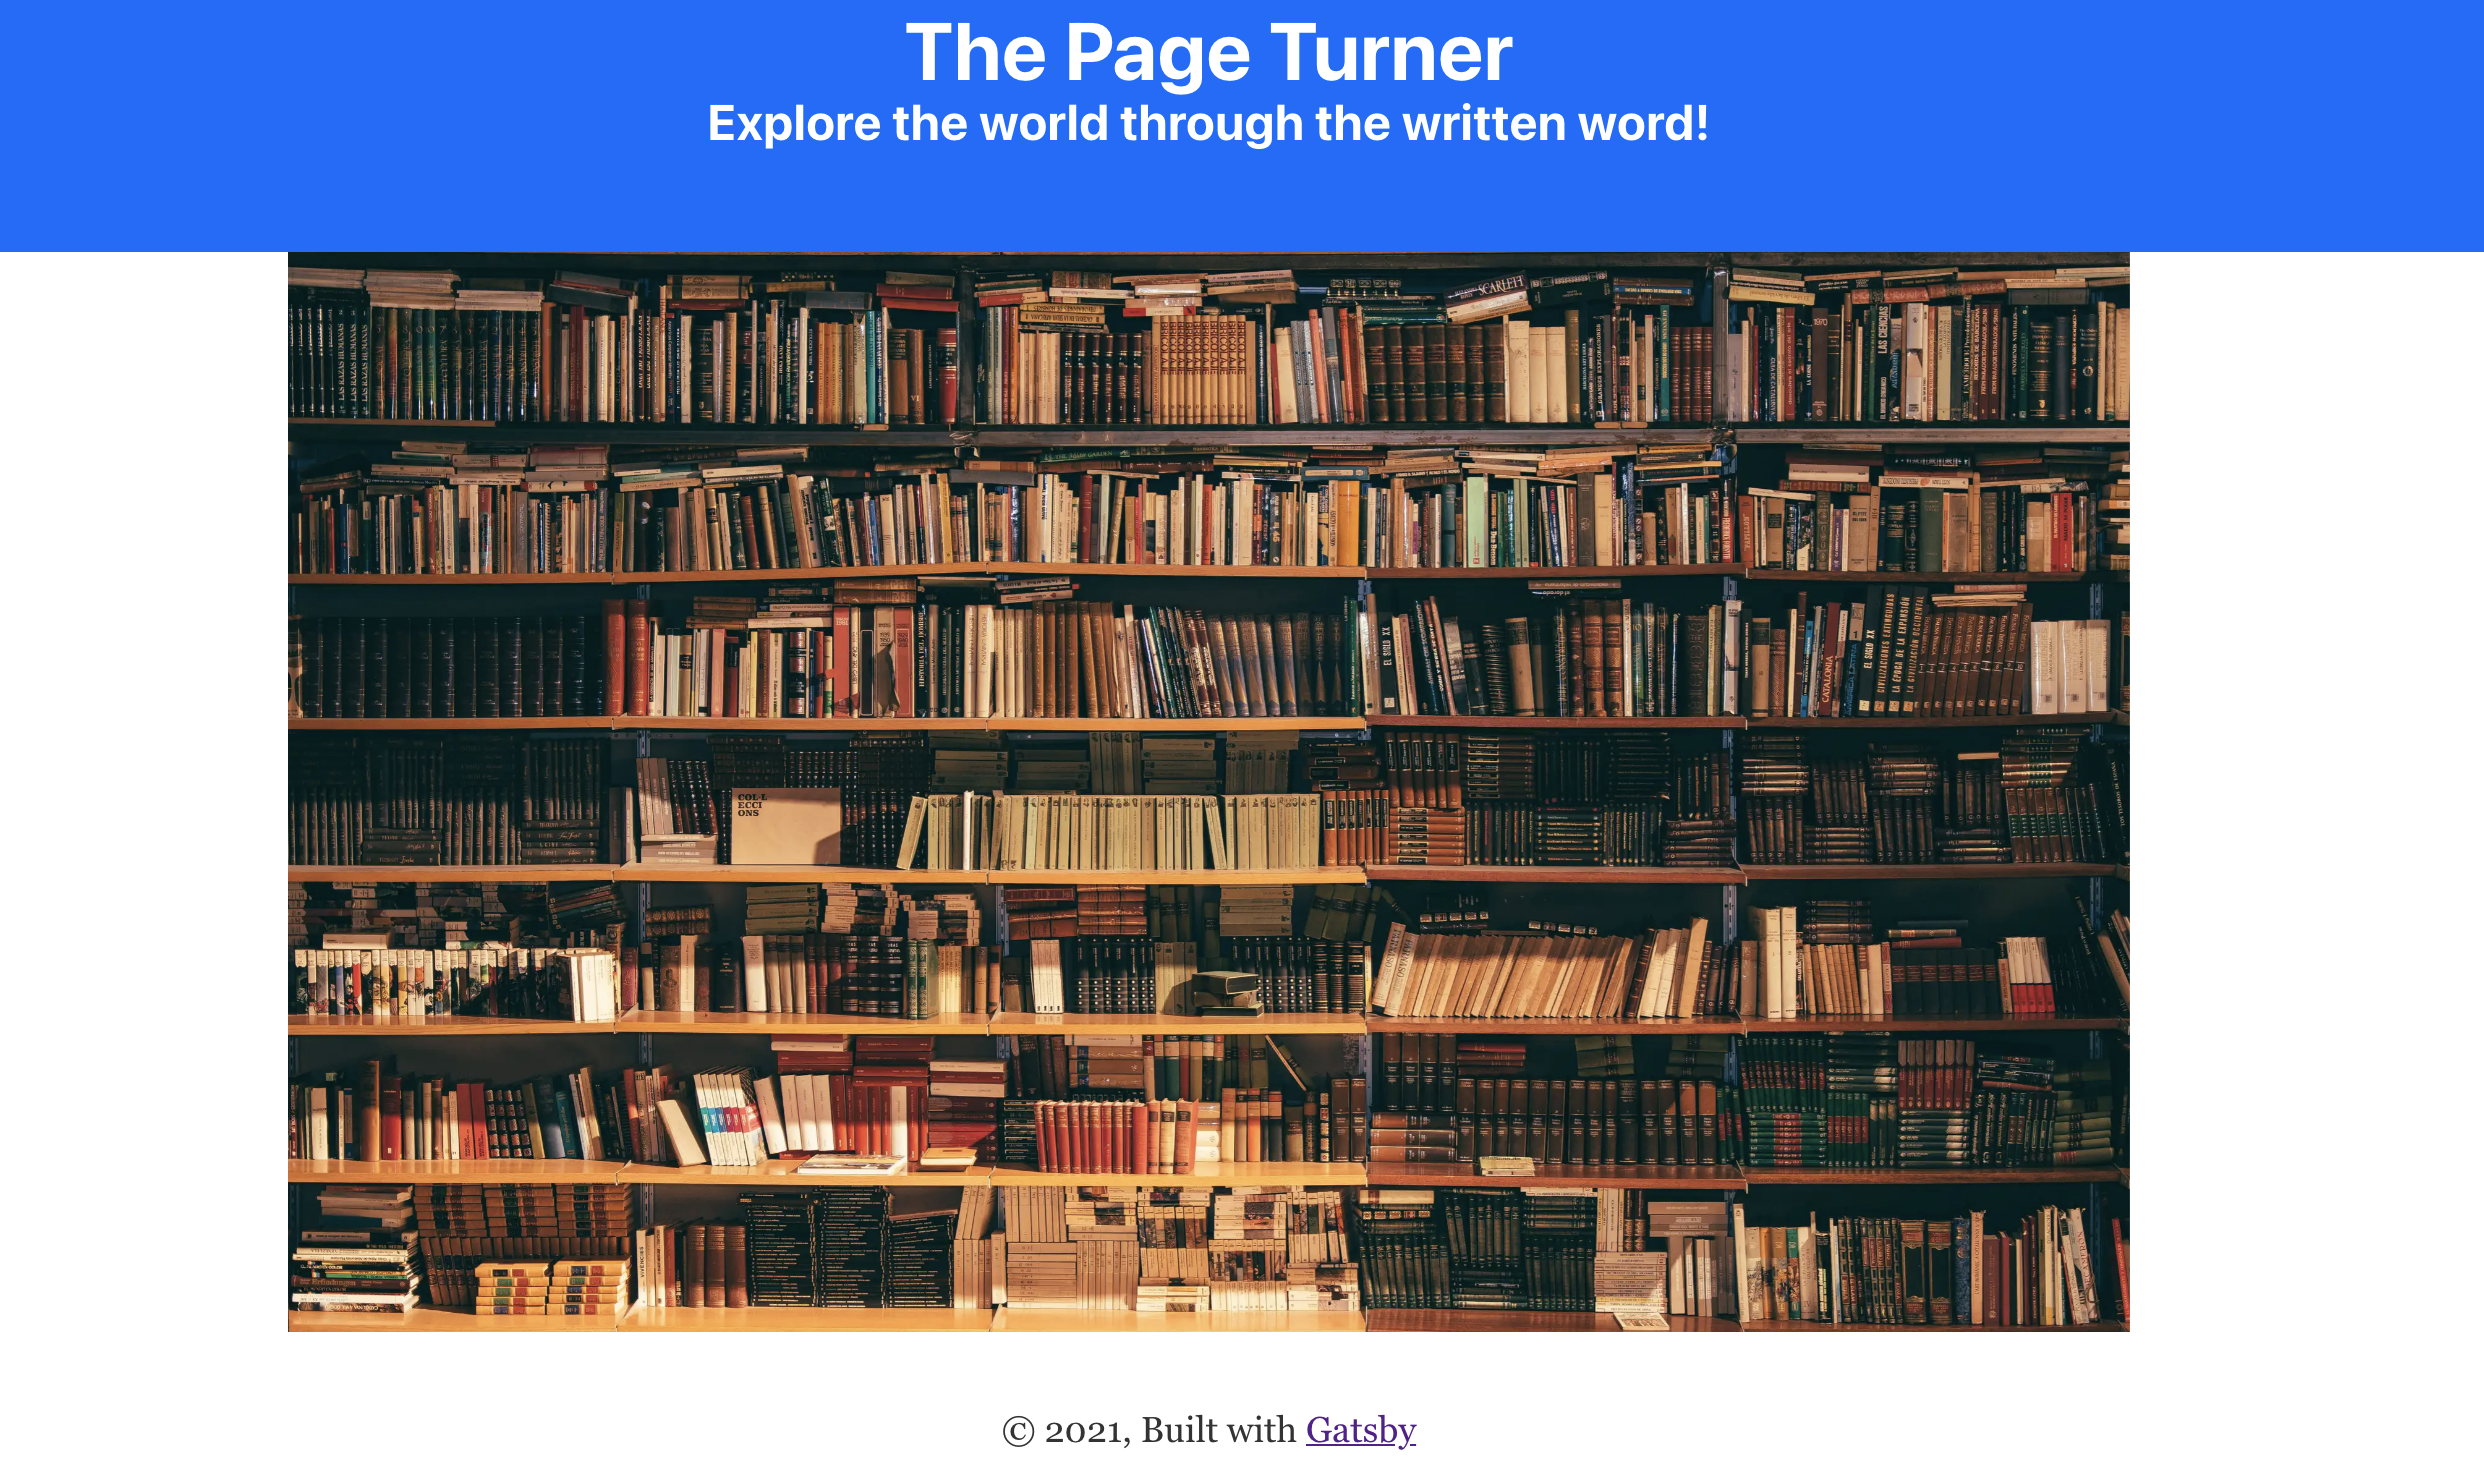 Rendered landing page with bookshelf image.